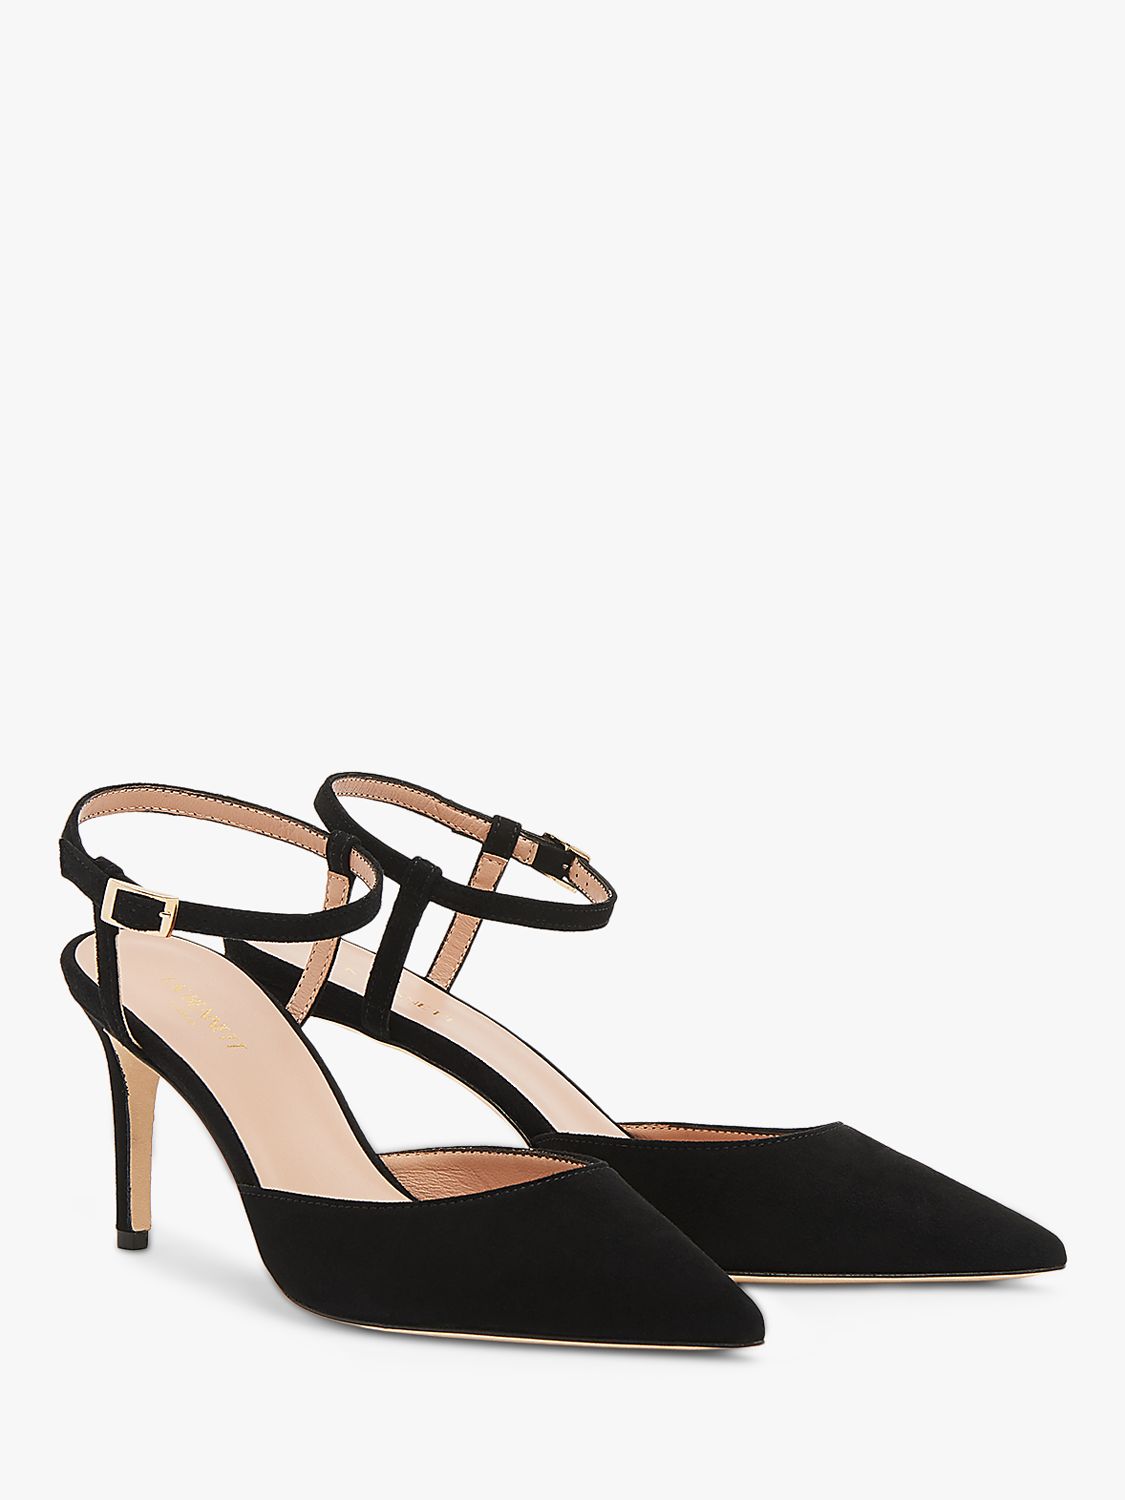 L.K.Bennett Hope Suede Pointed Court Shoes, Black at John Lewis & Partners